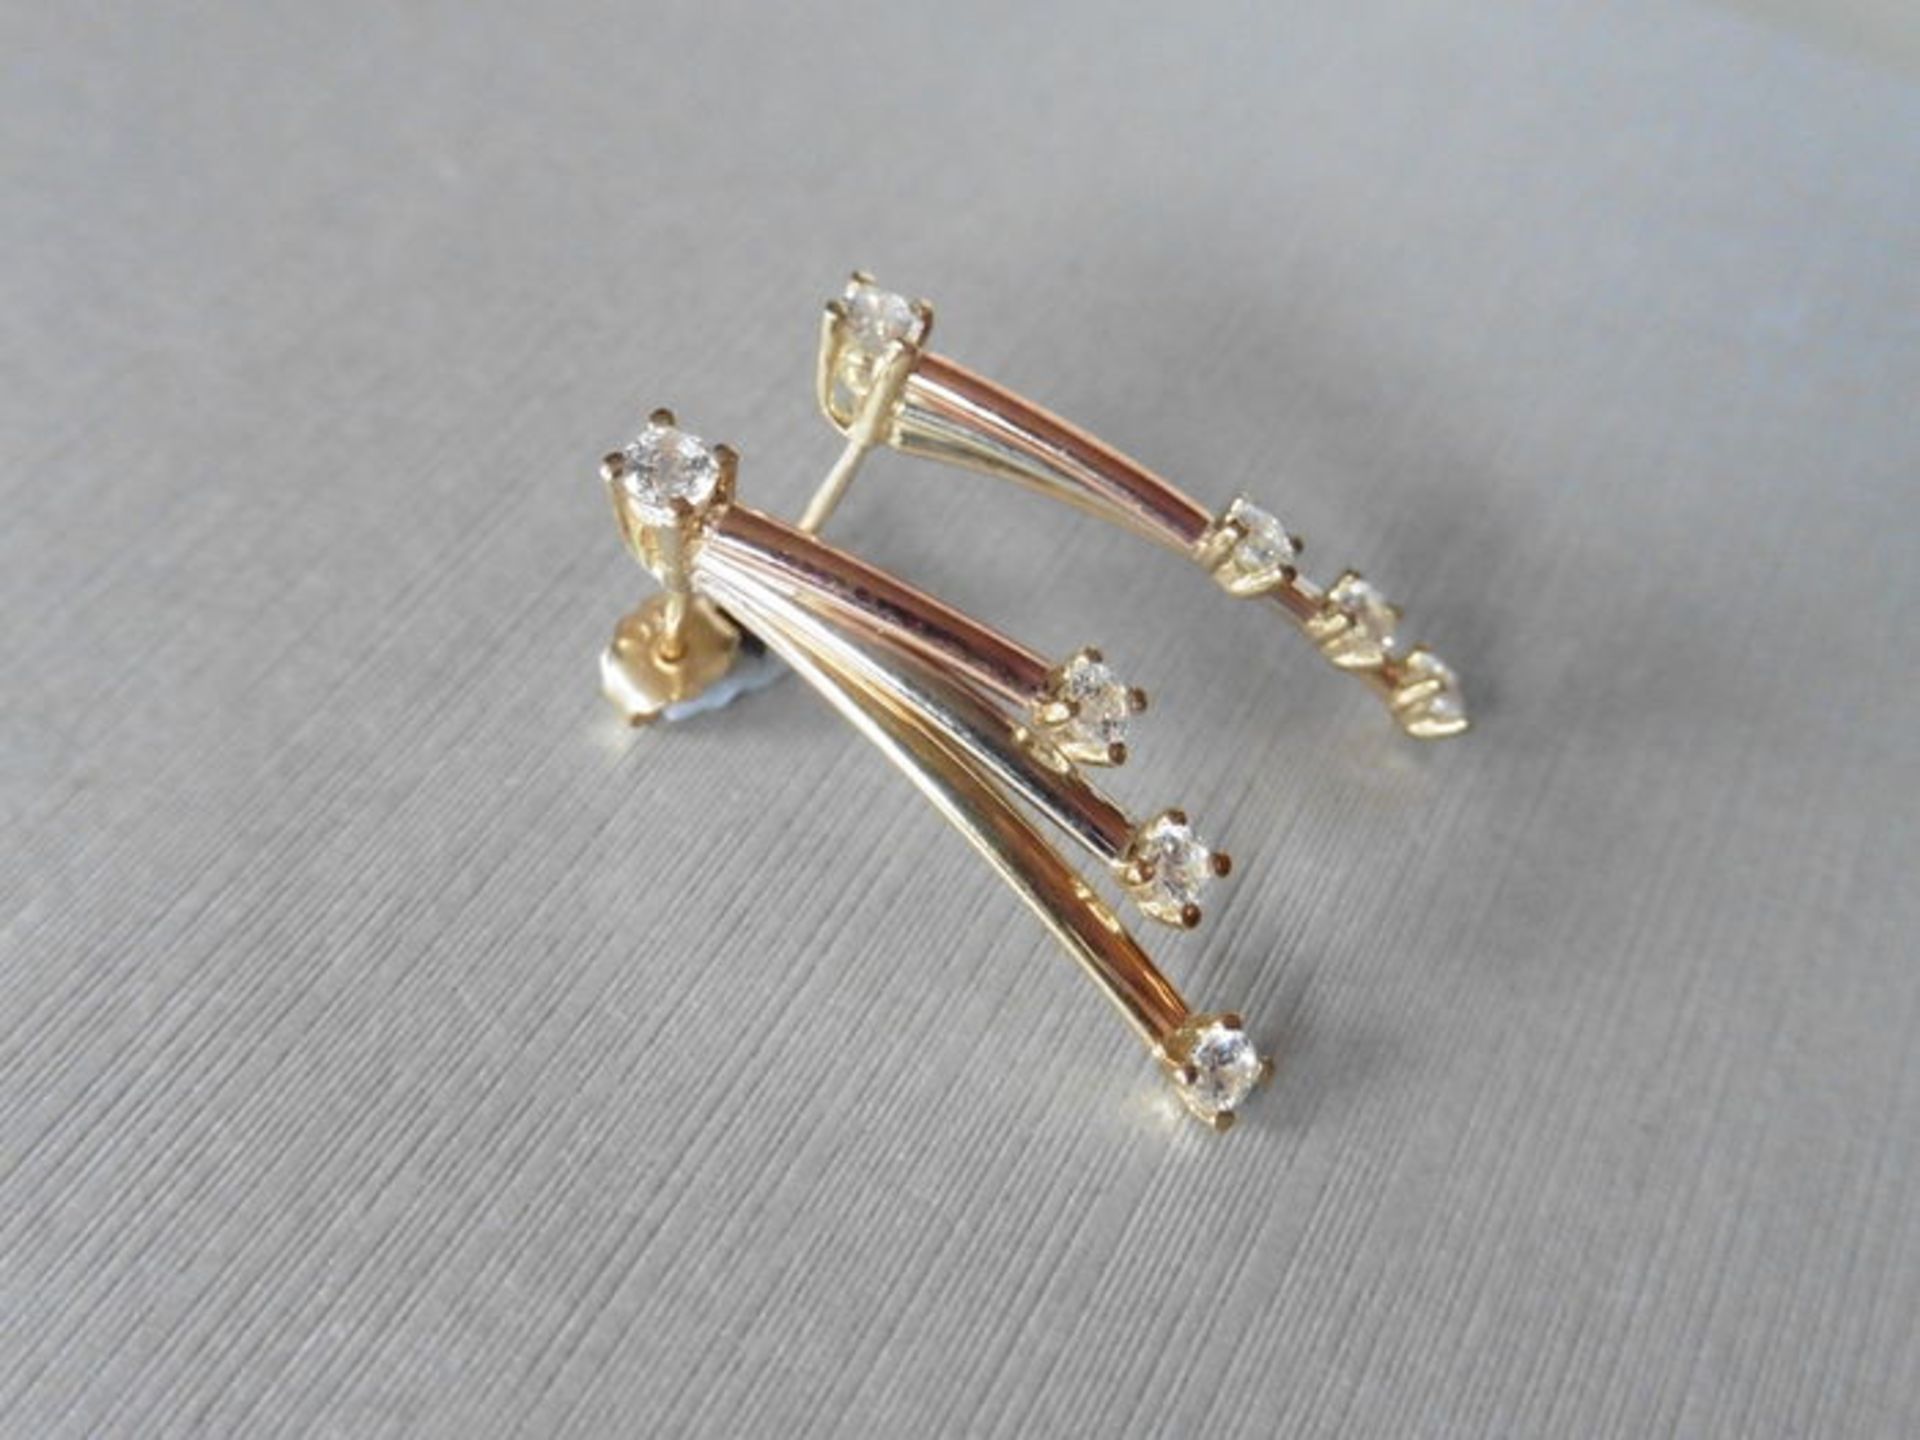 9ct gold diamond set drop style earrings. Set with white, rose and yellow gold bars with a small